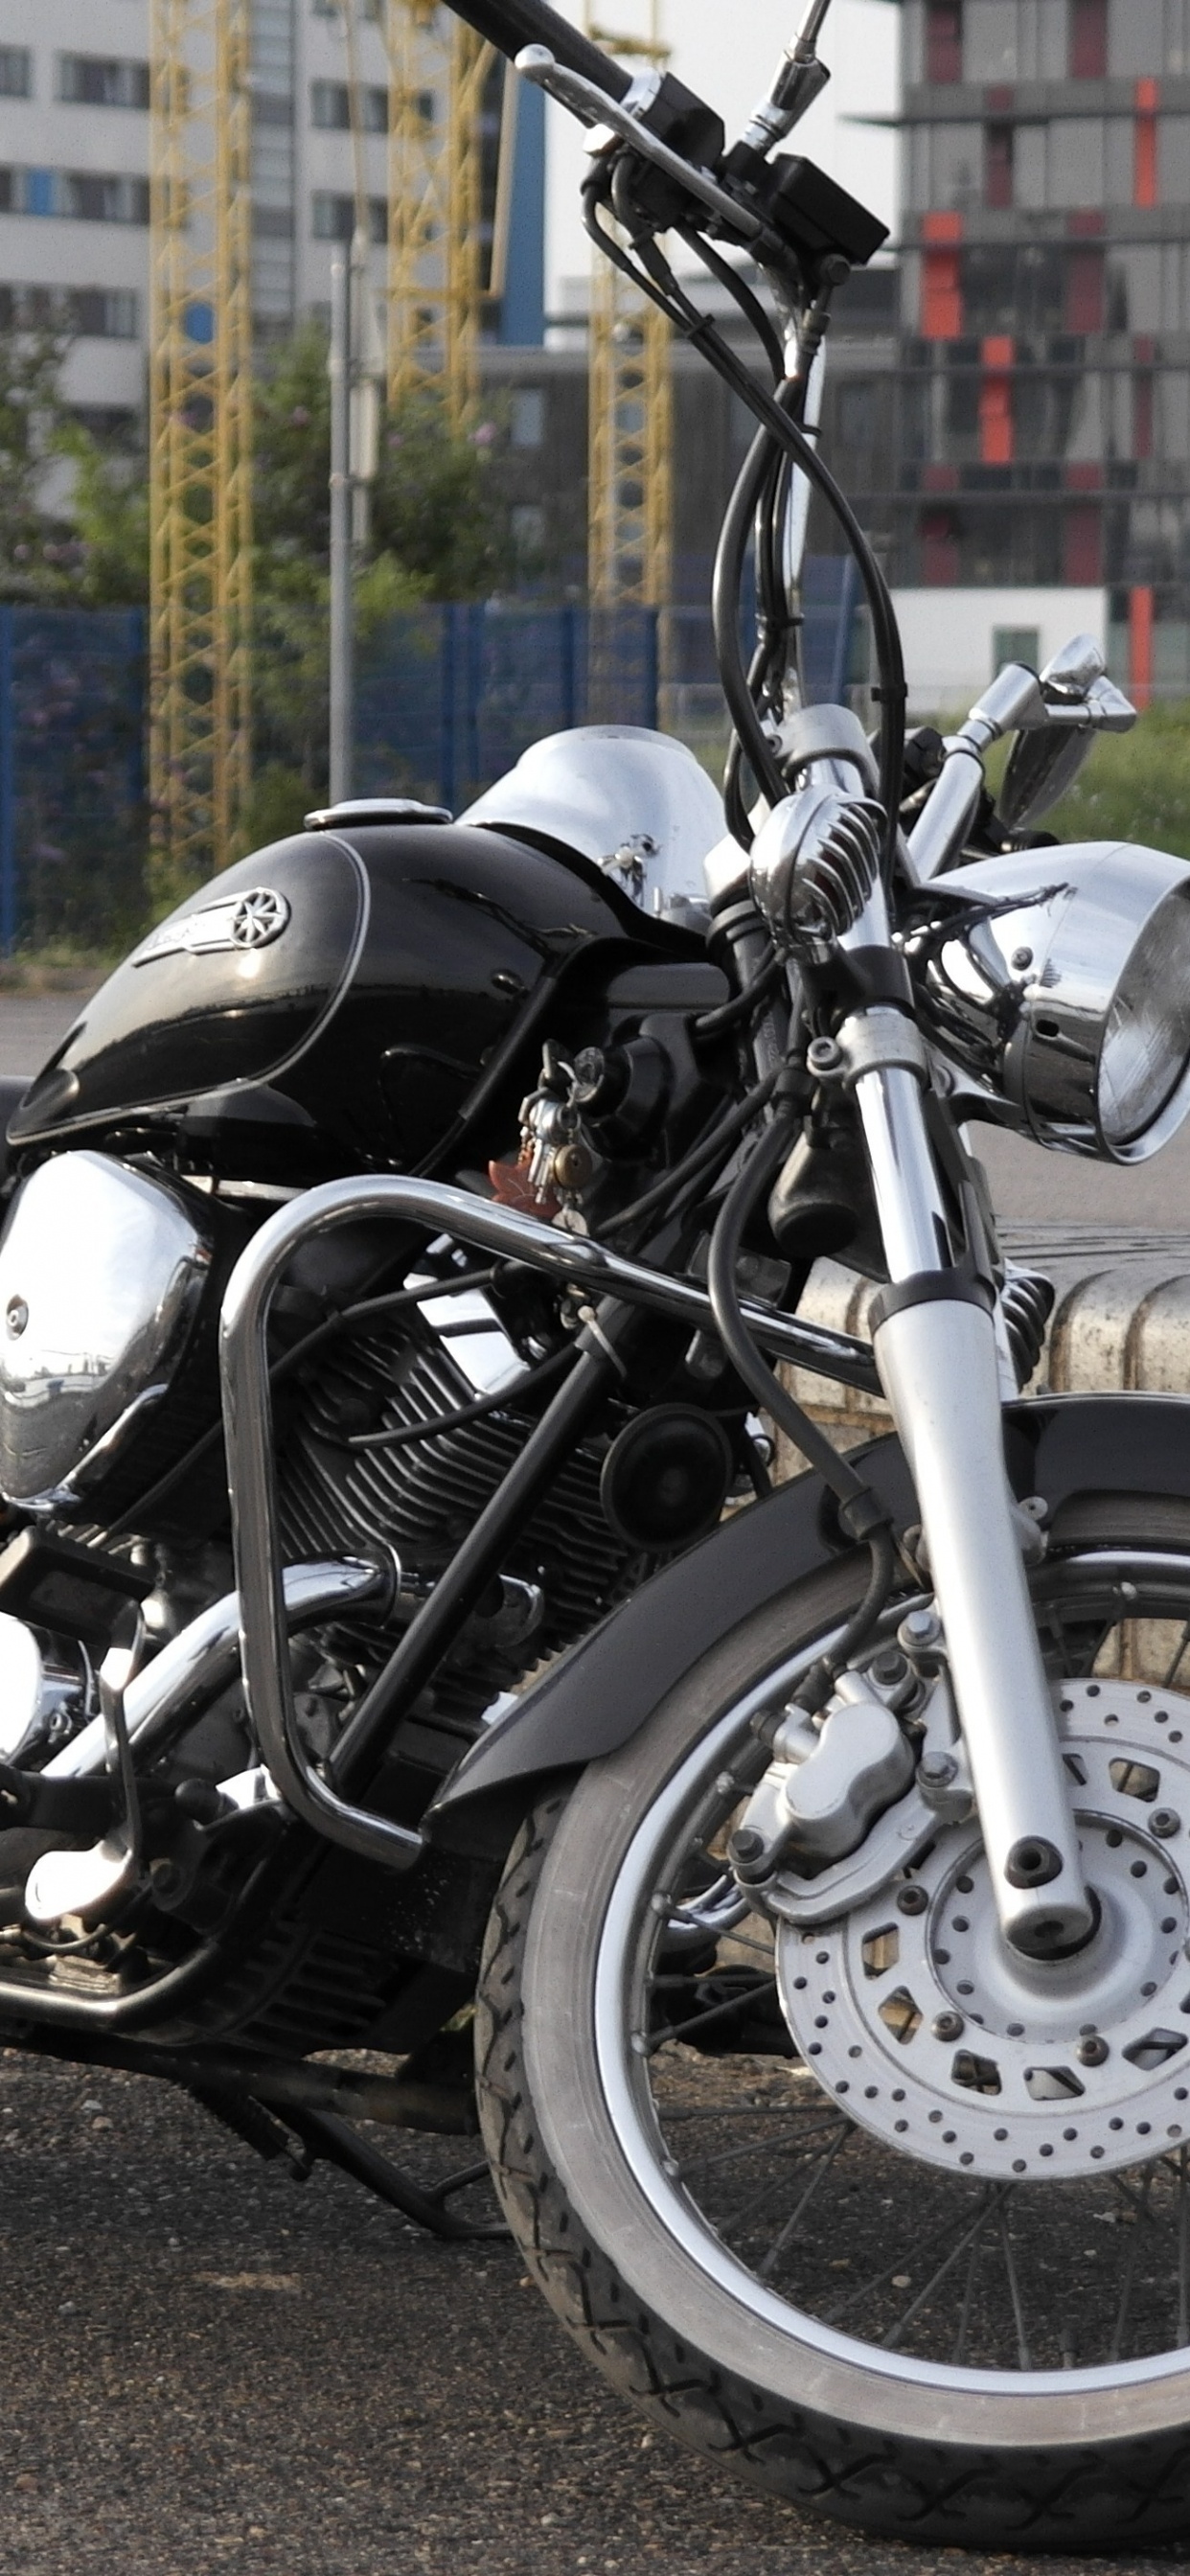 Black and Silver Cruiser Motorcycle on Road During Daytime. Wallpaper in 1242x2688 Resolution